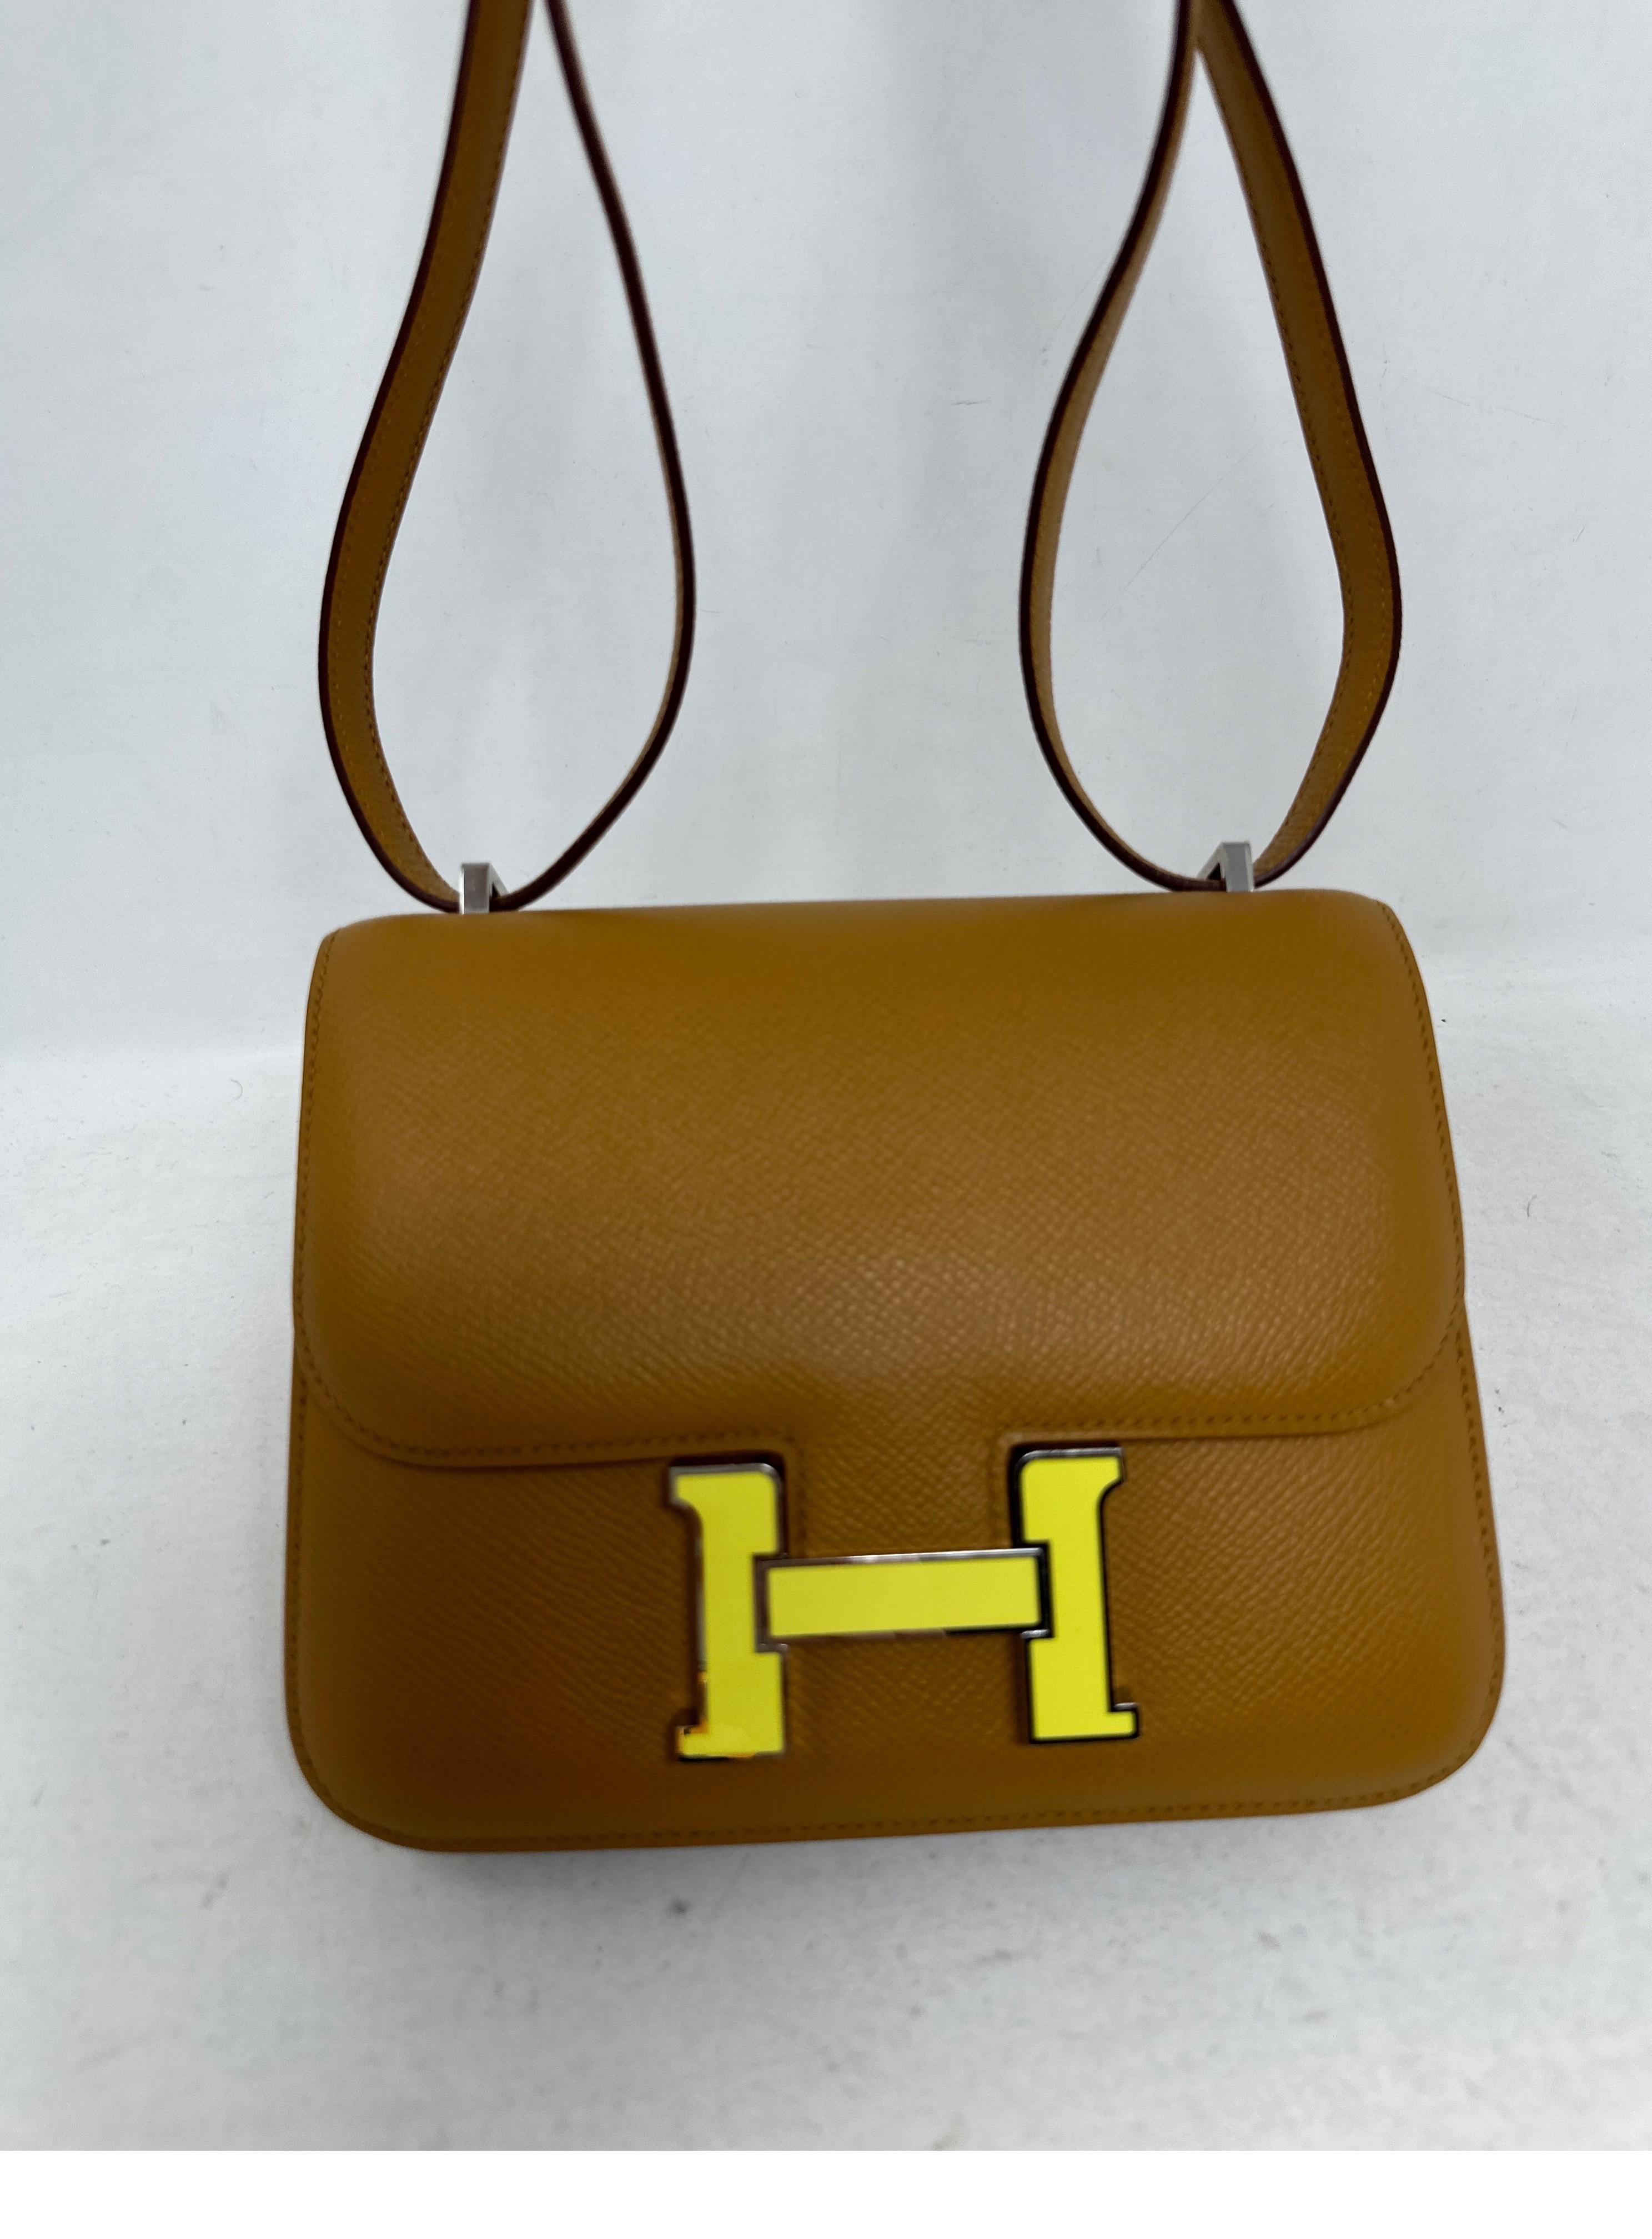 Hermes Mini Constance Gold Bag  In Excellent Condition For Sale In Athens, GA